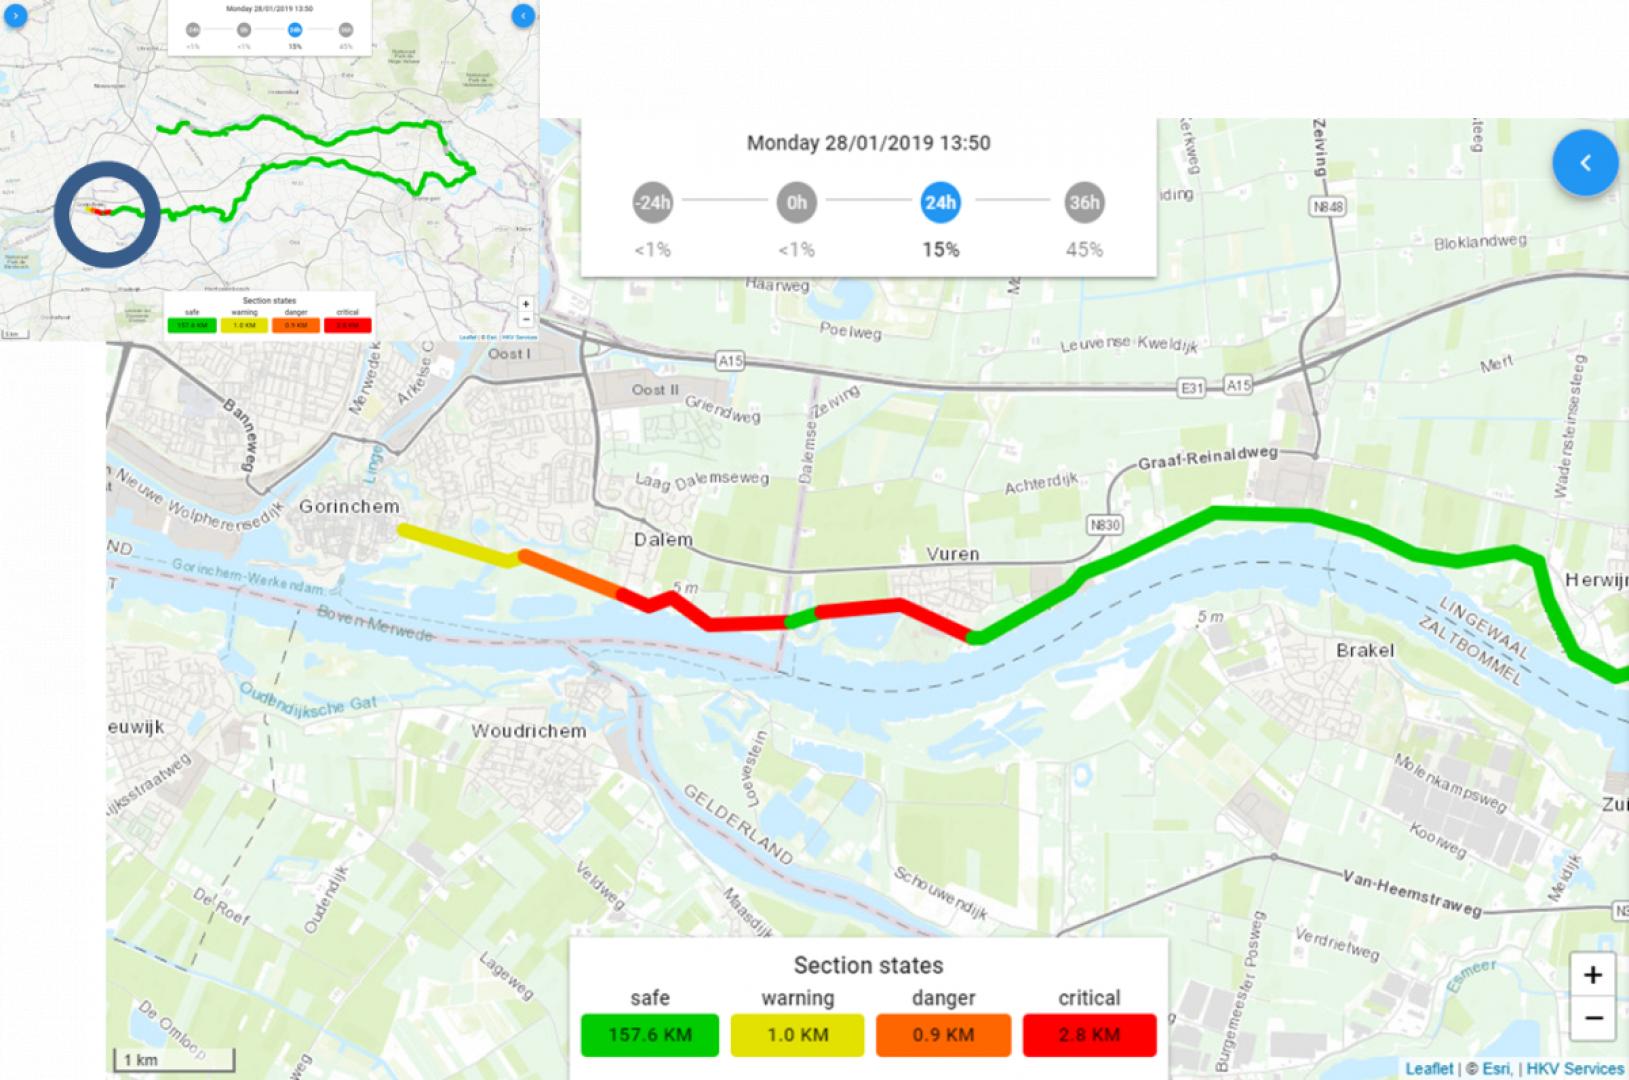 Real Time Flood Risk Assessement Viewer: diques